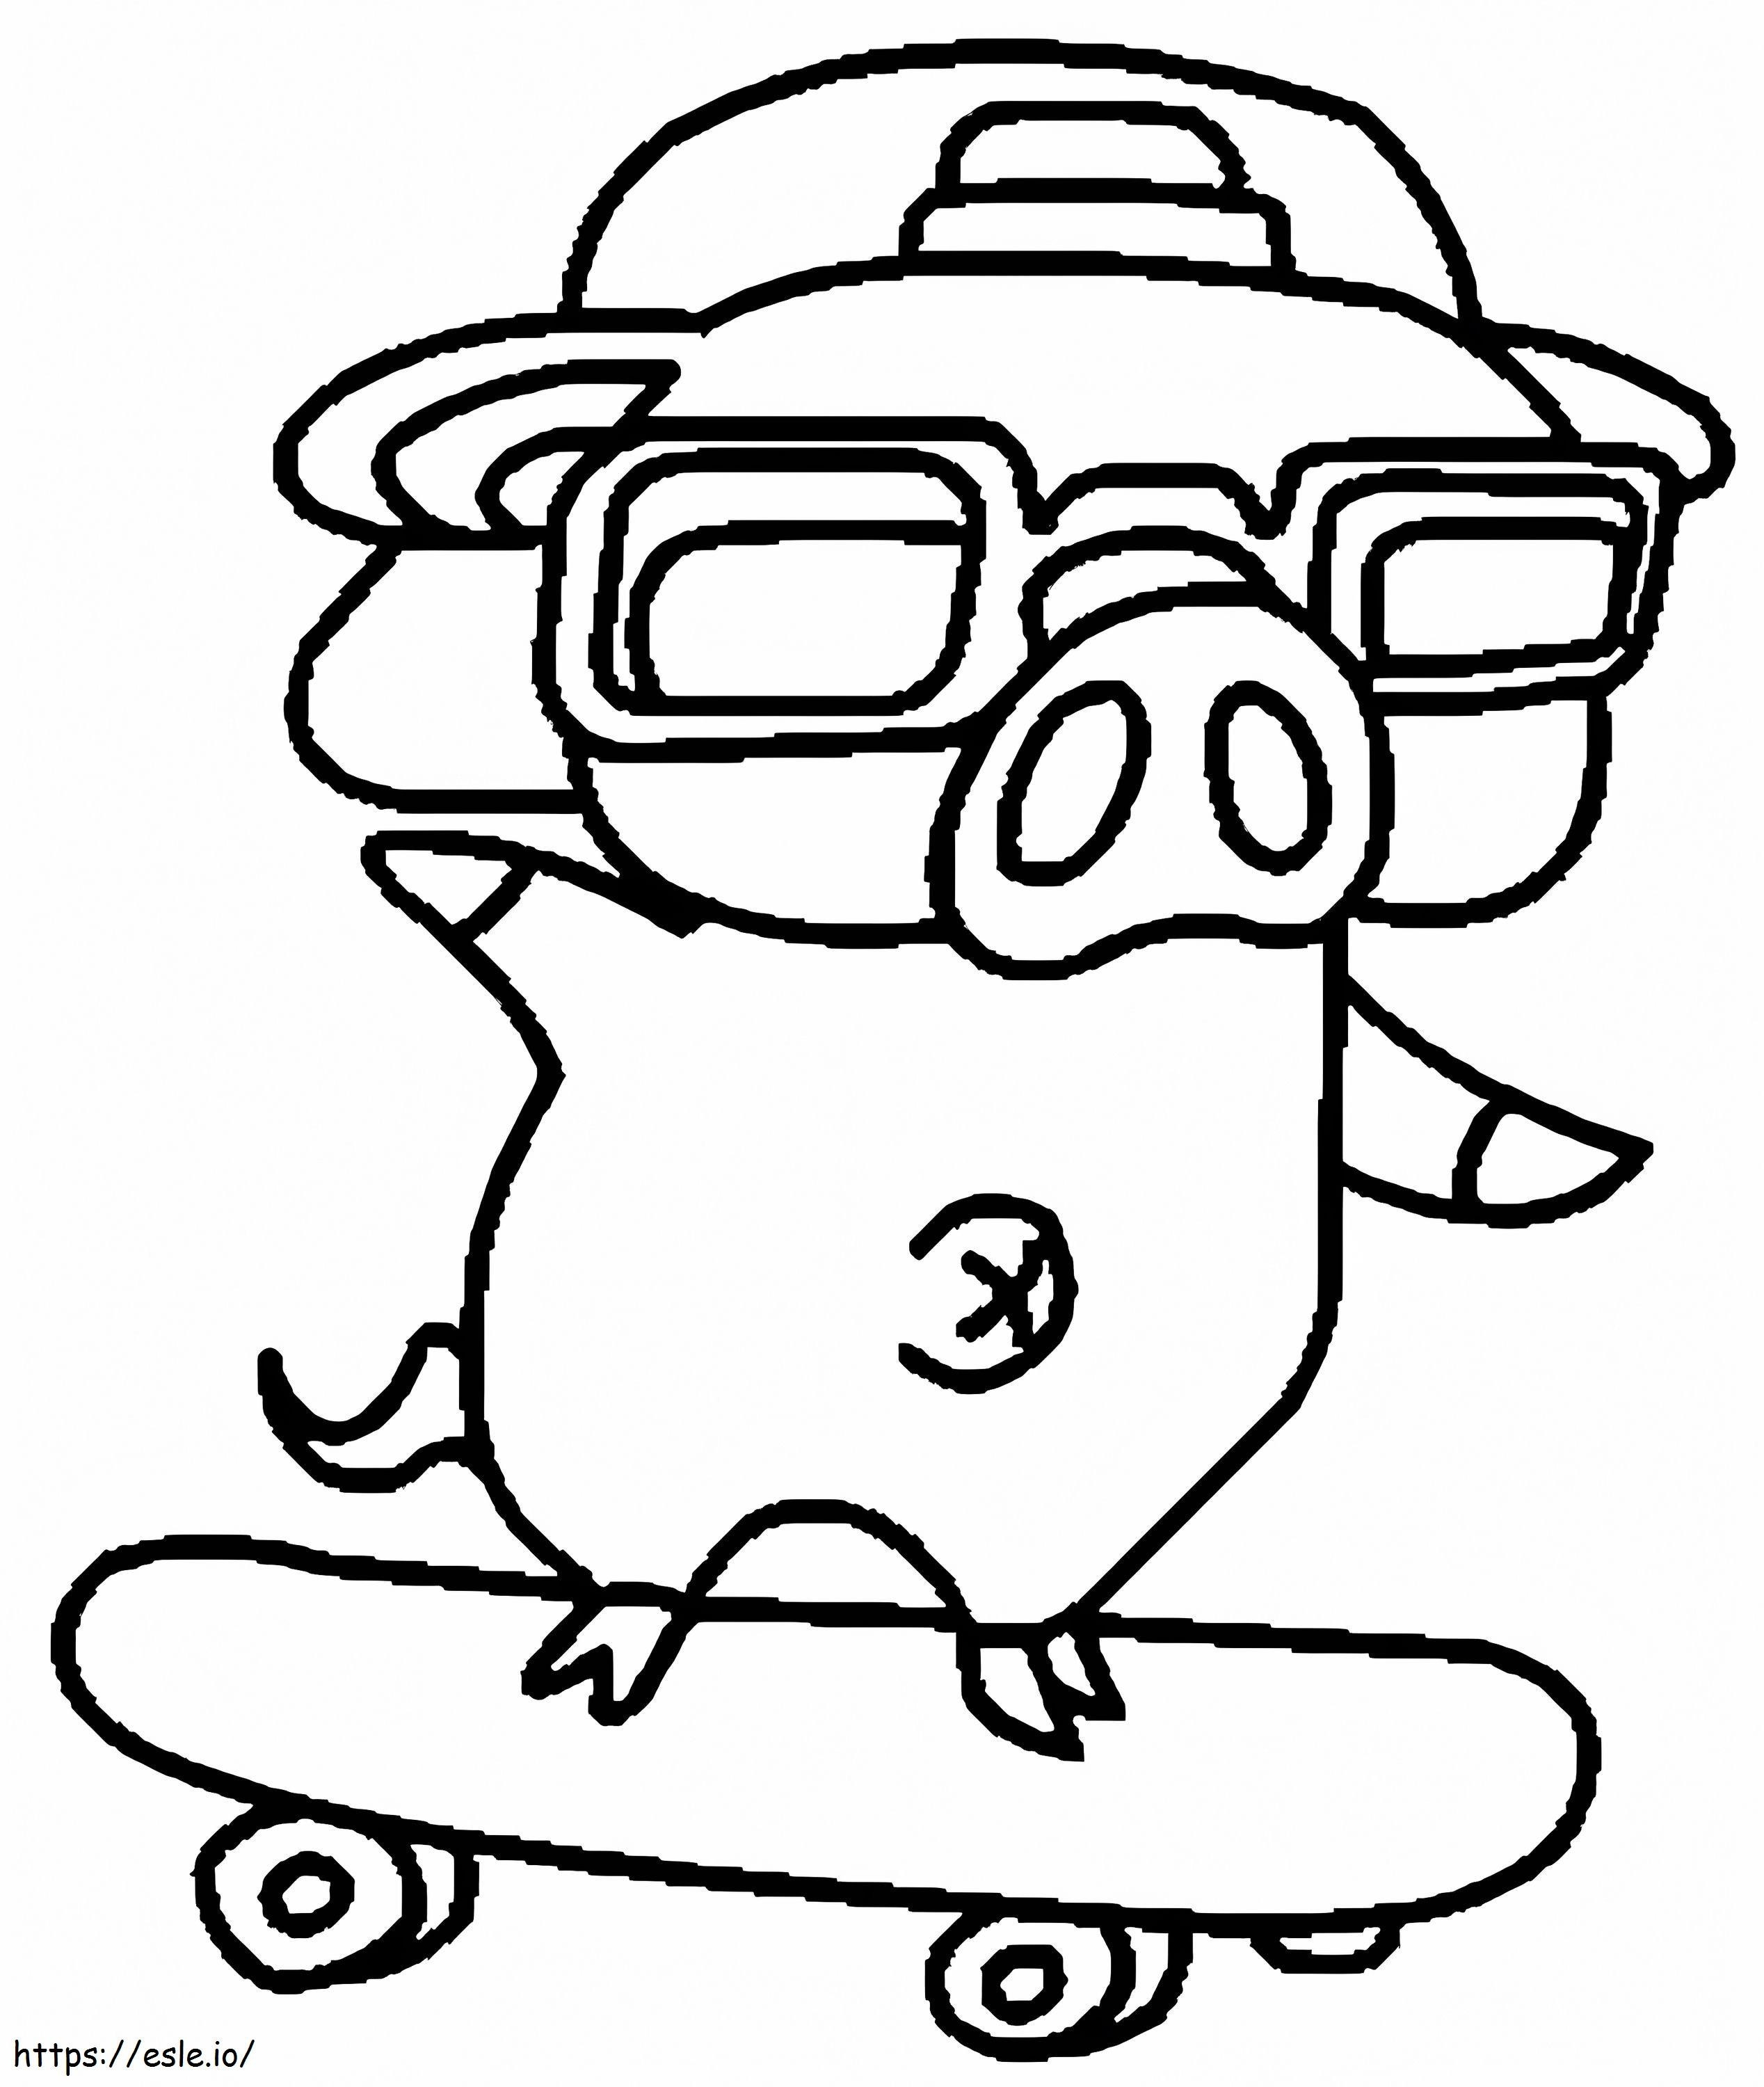 A Pig With A Skateboard coloring page